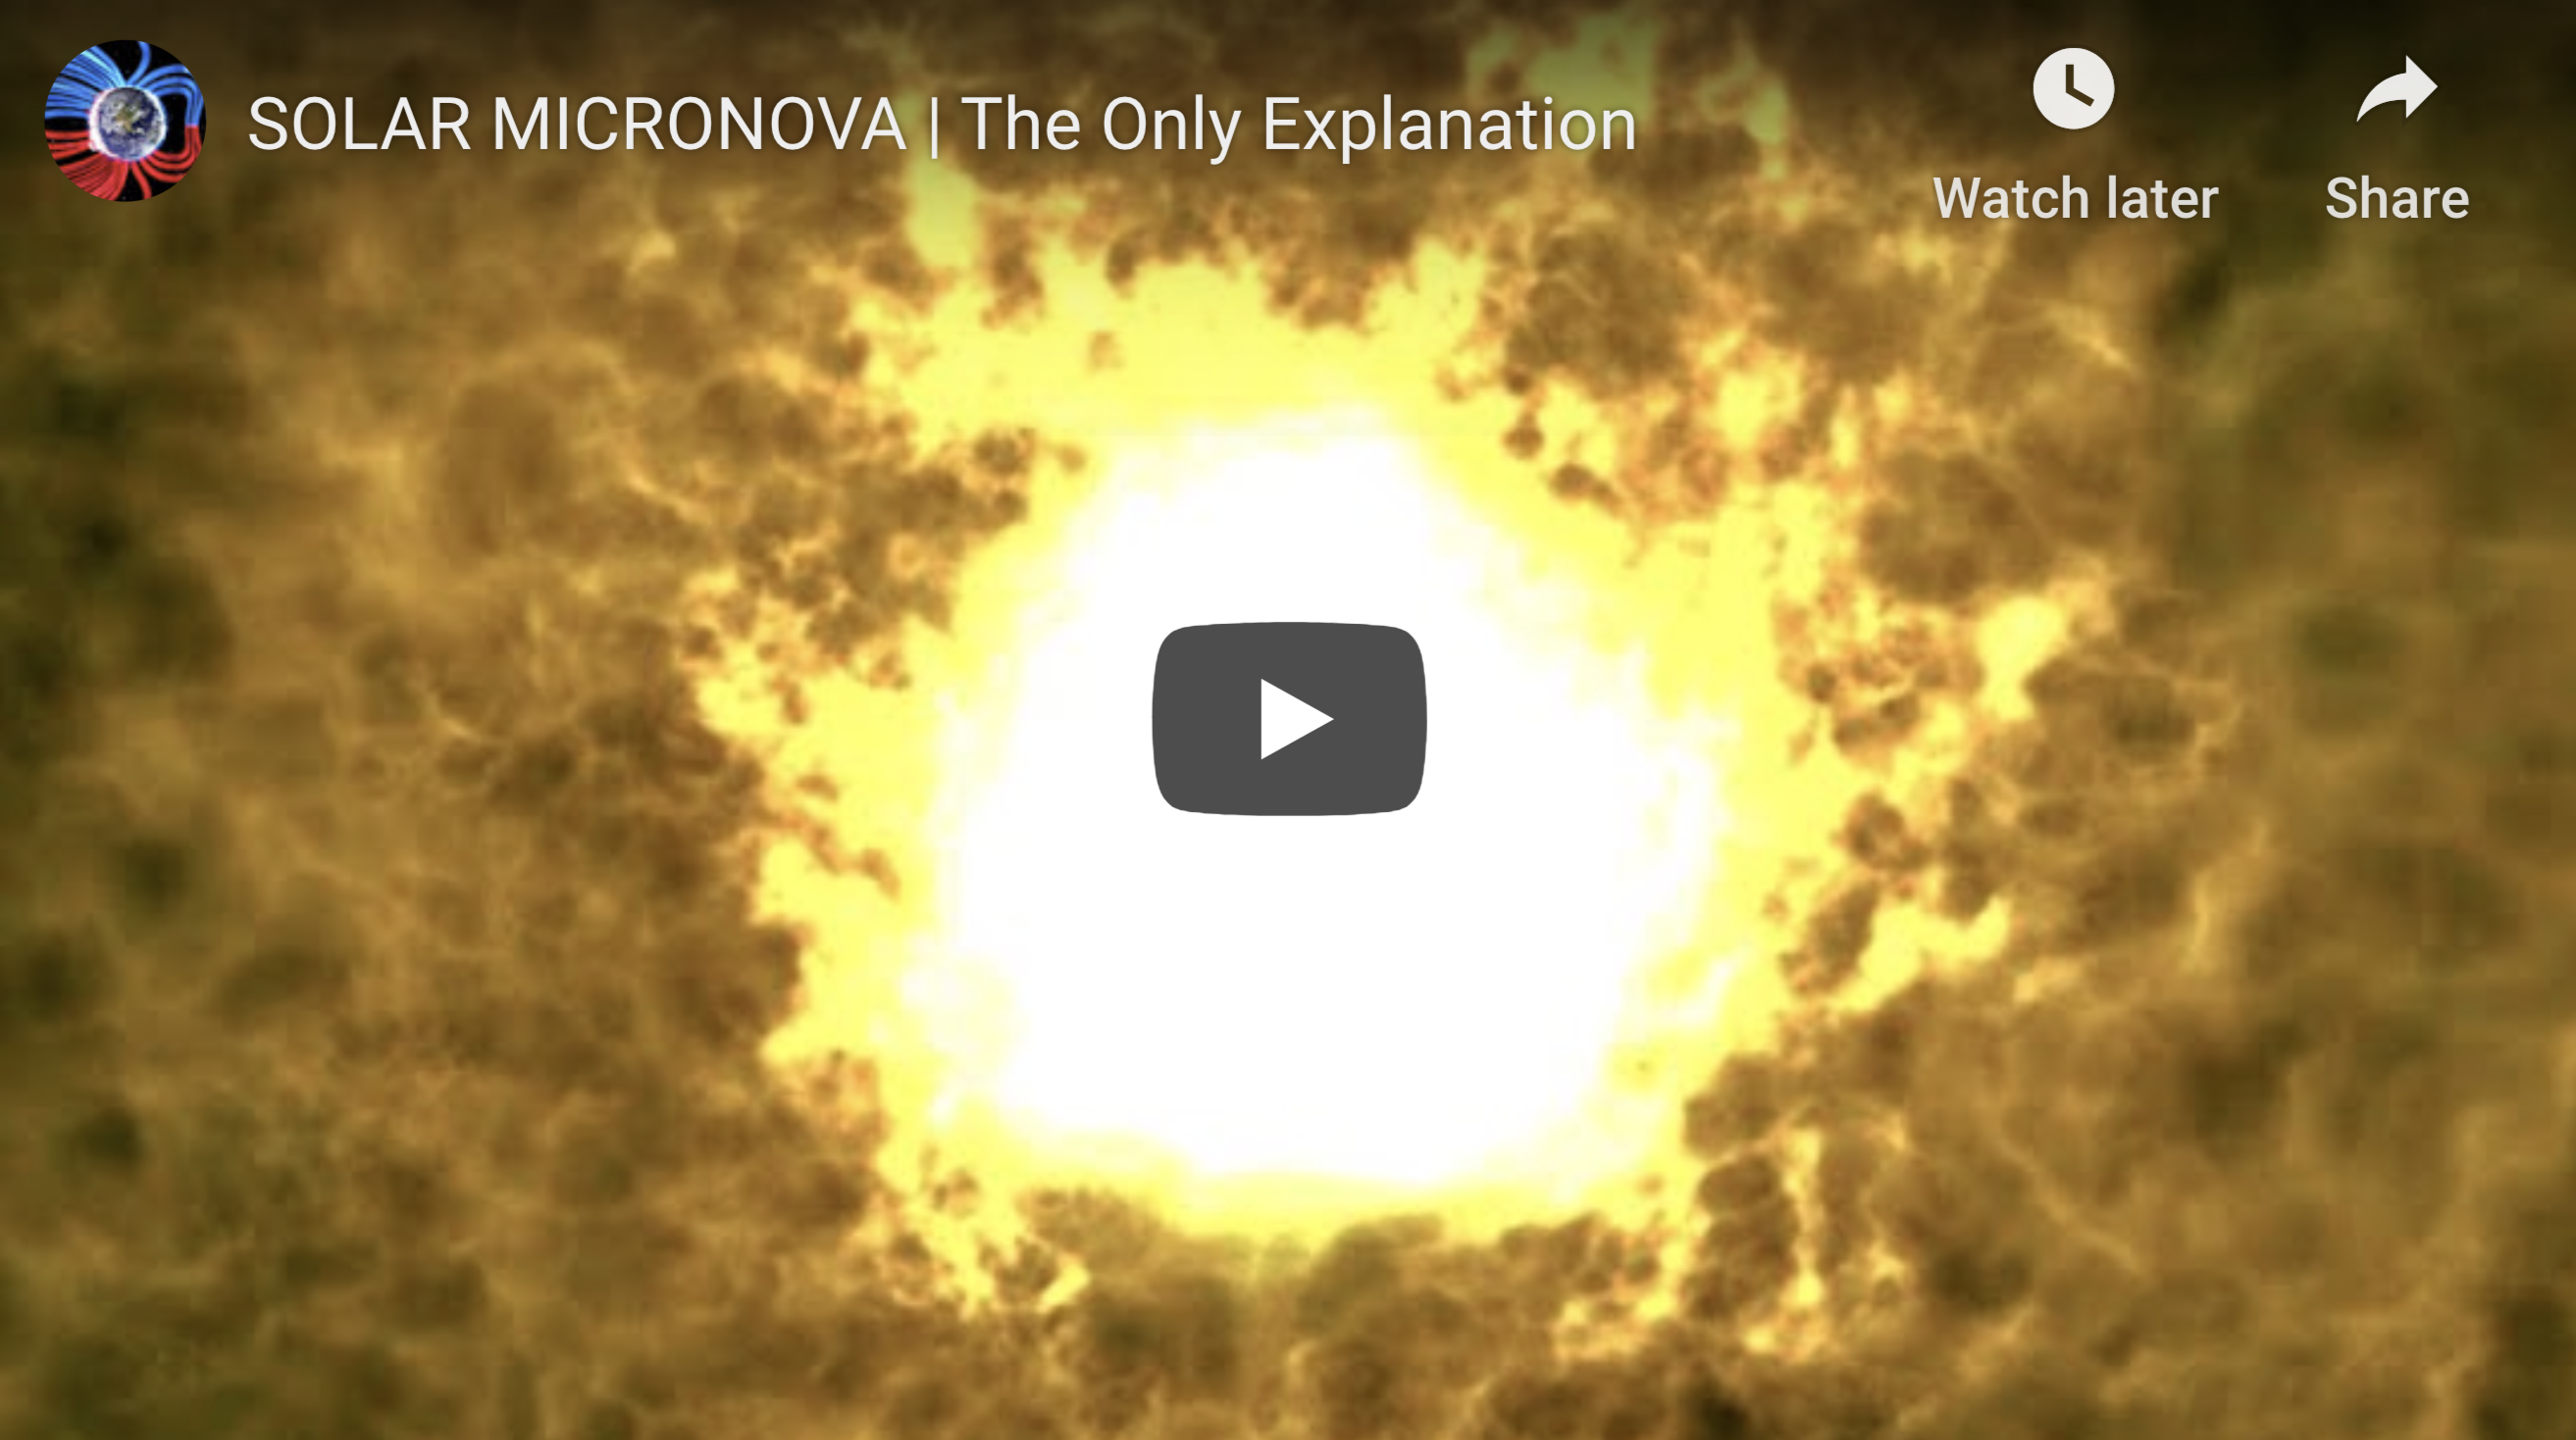 SOLAR MICRONOVA The Only Explanation EXZM Suspicious Observers post July 3rd 2020